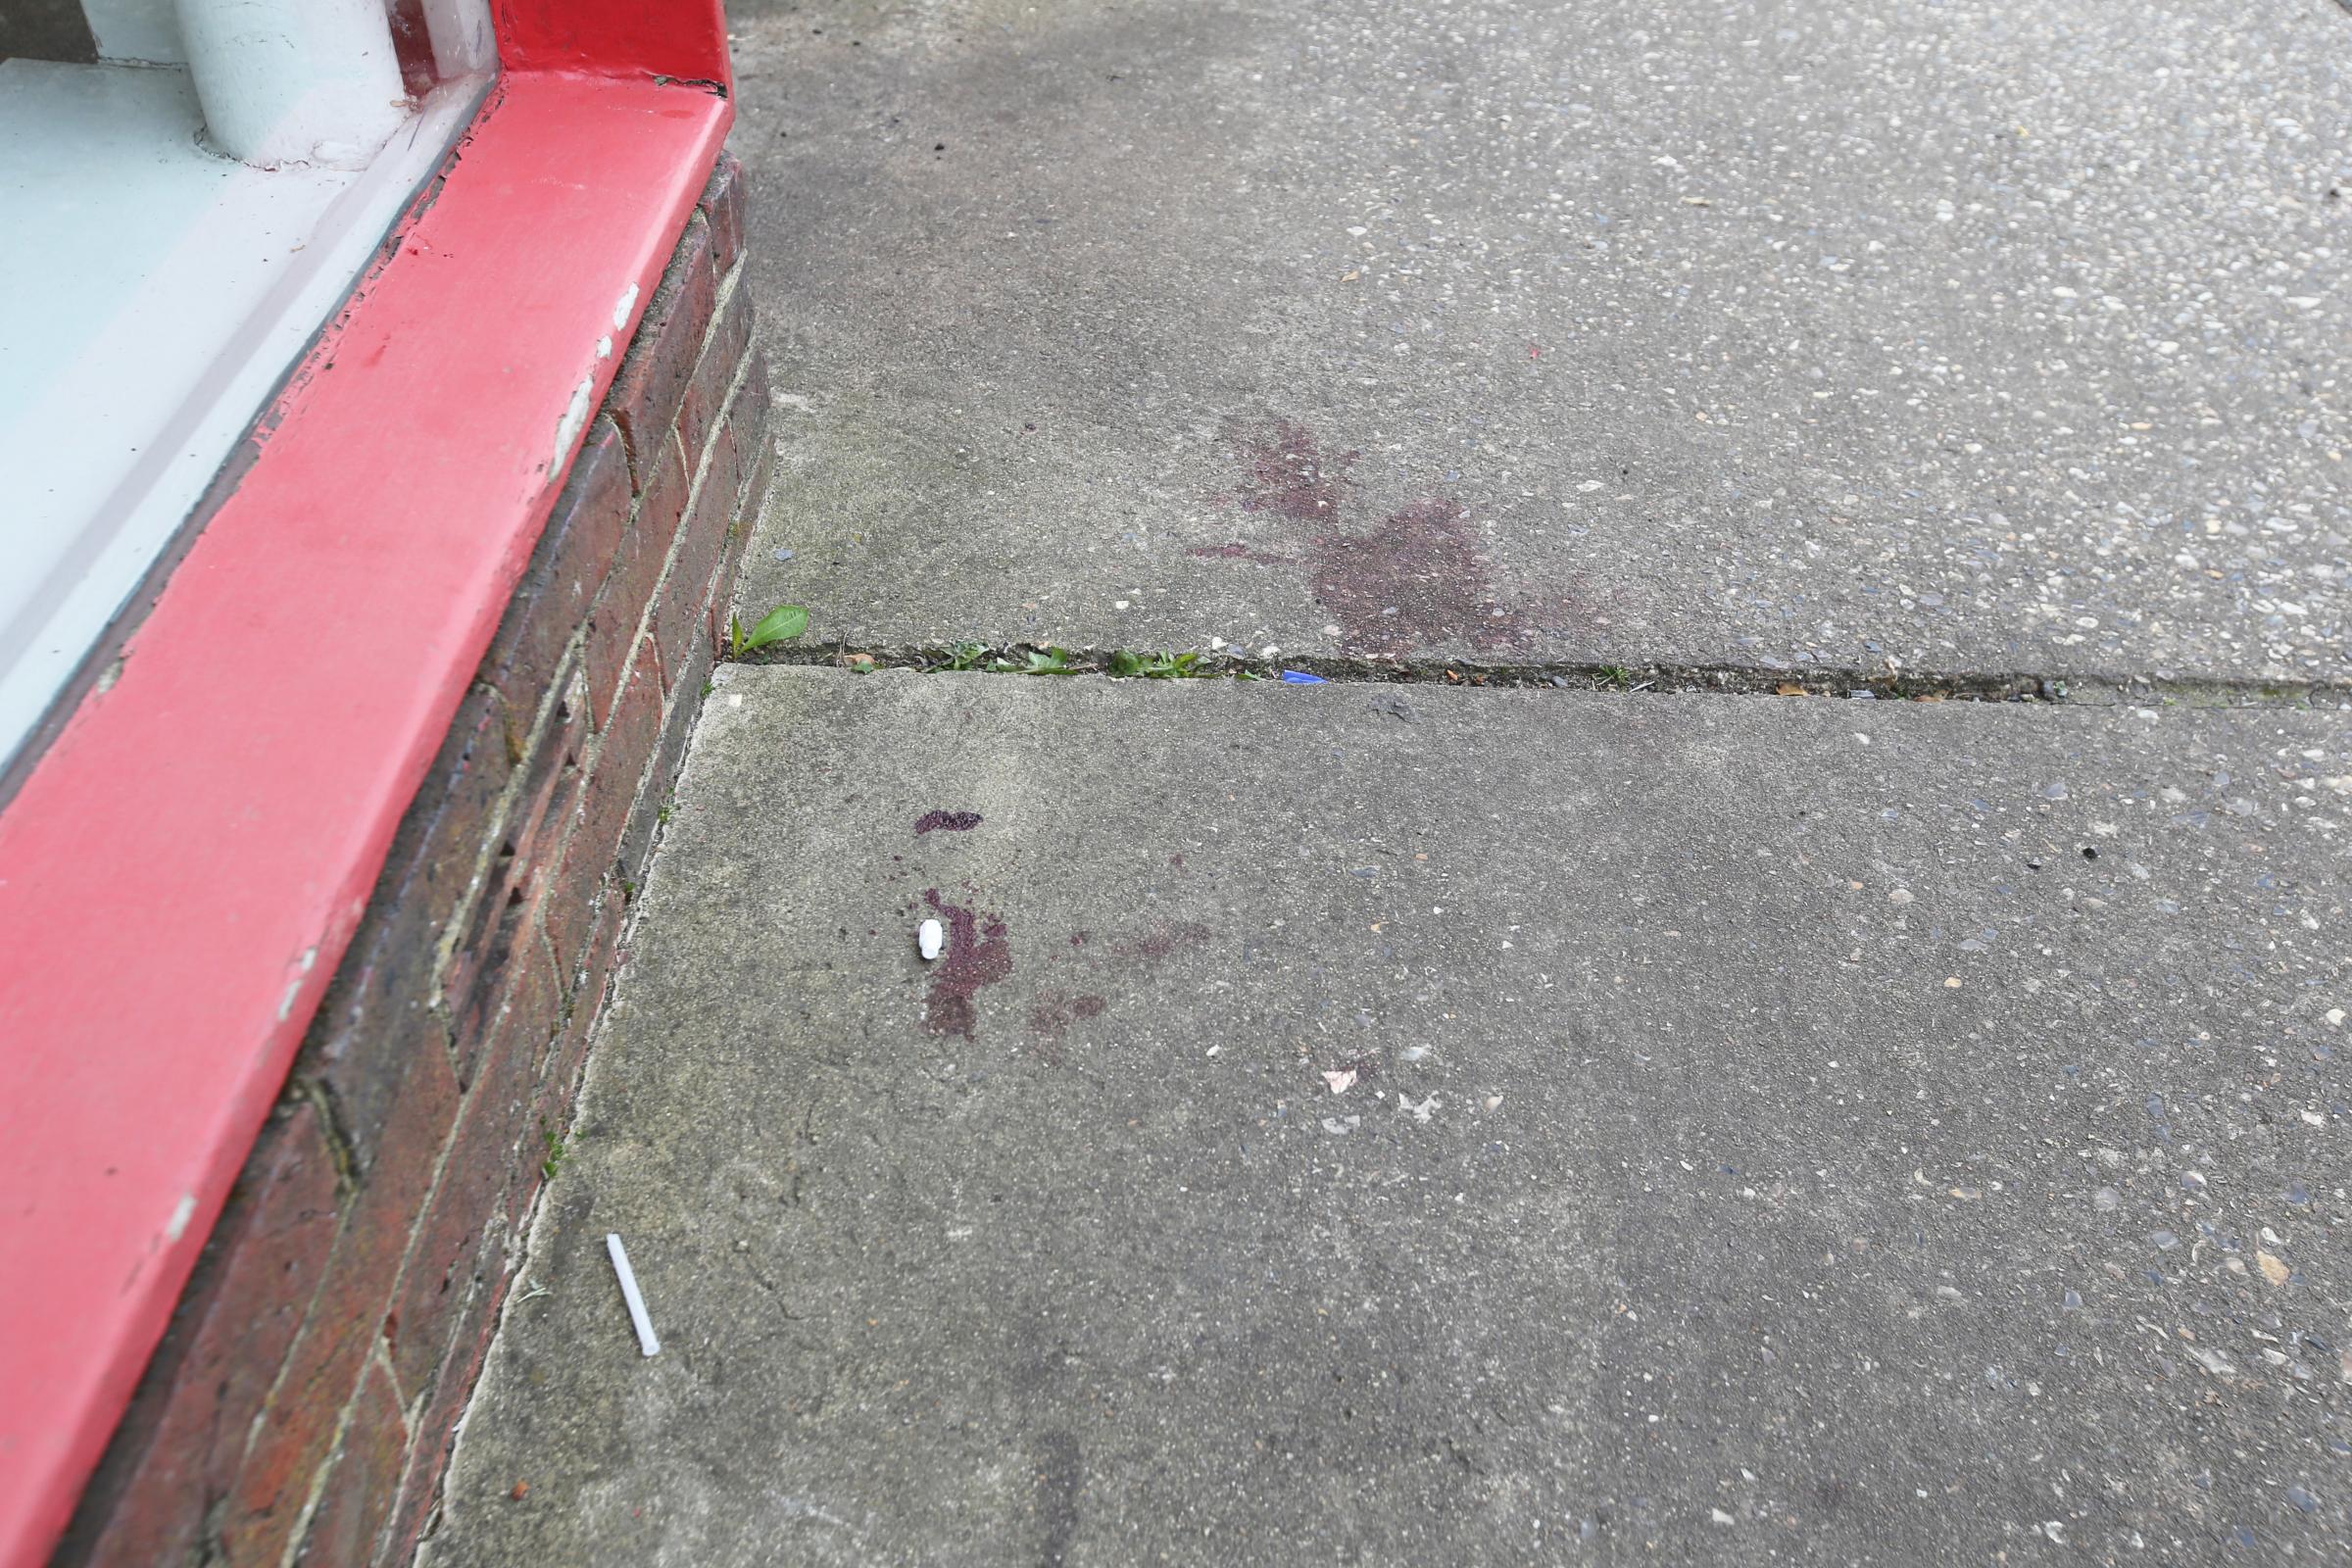 A section of ground where witnesses said there had been a pool of blood after a stabbing near Billingshurst Railway Station